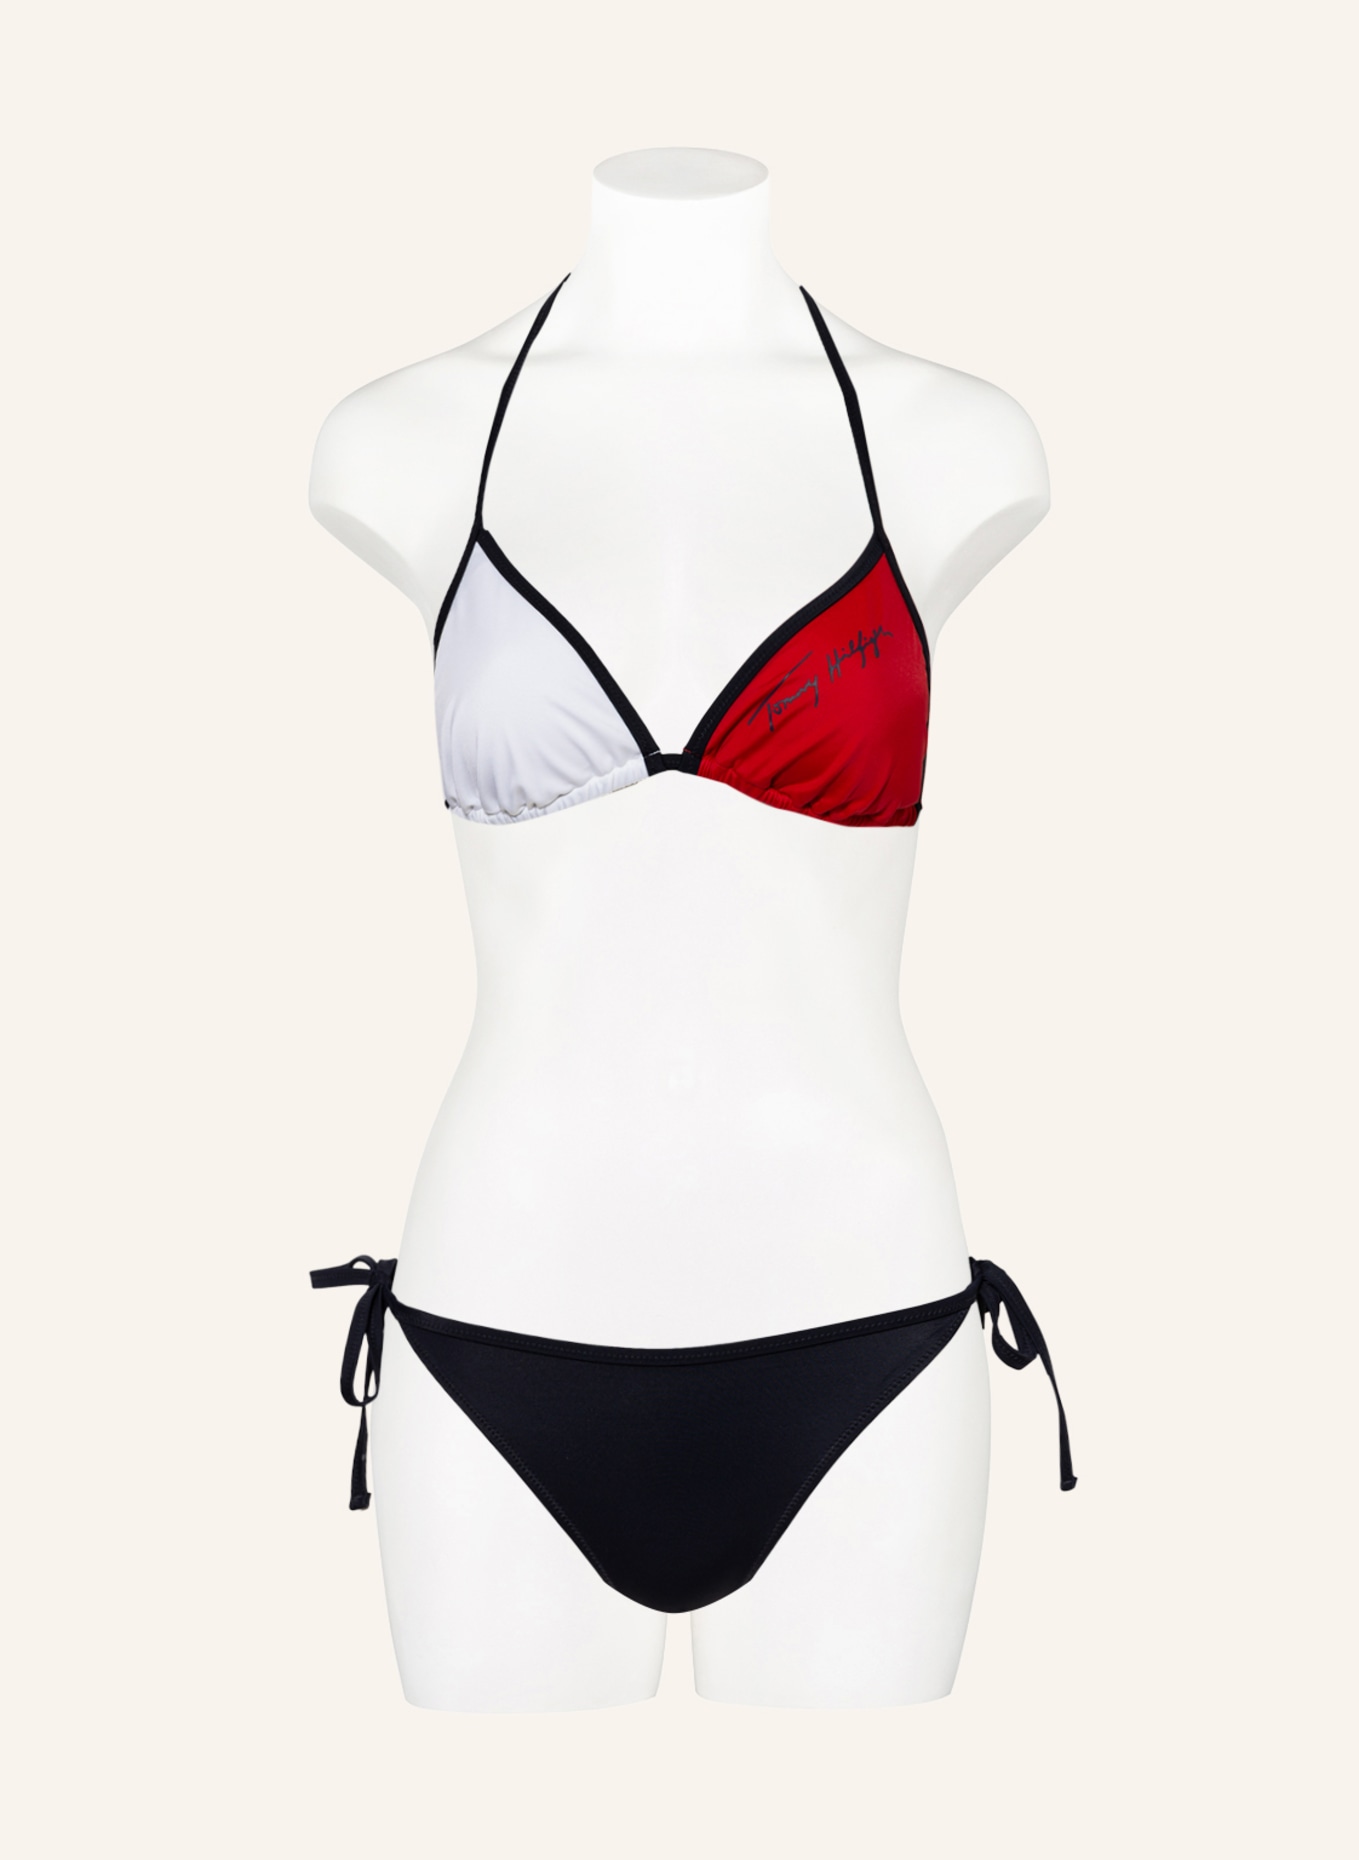 Tommy Hilfiger BIKINI Red - Fast delivery